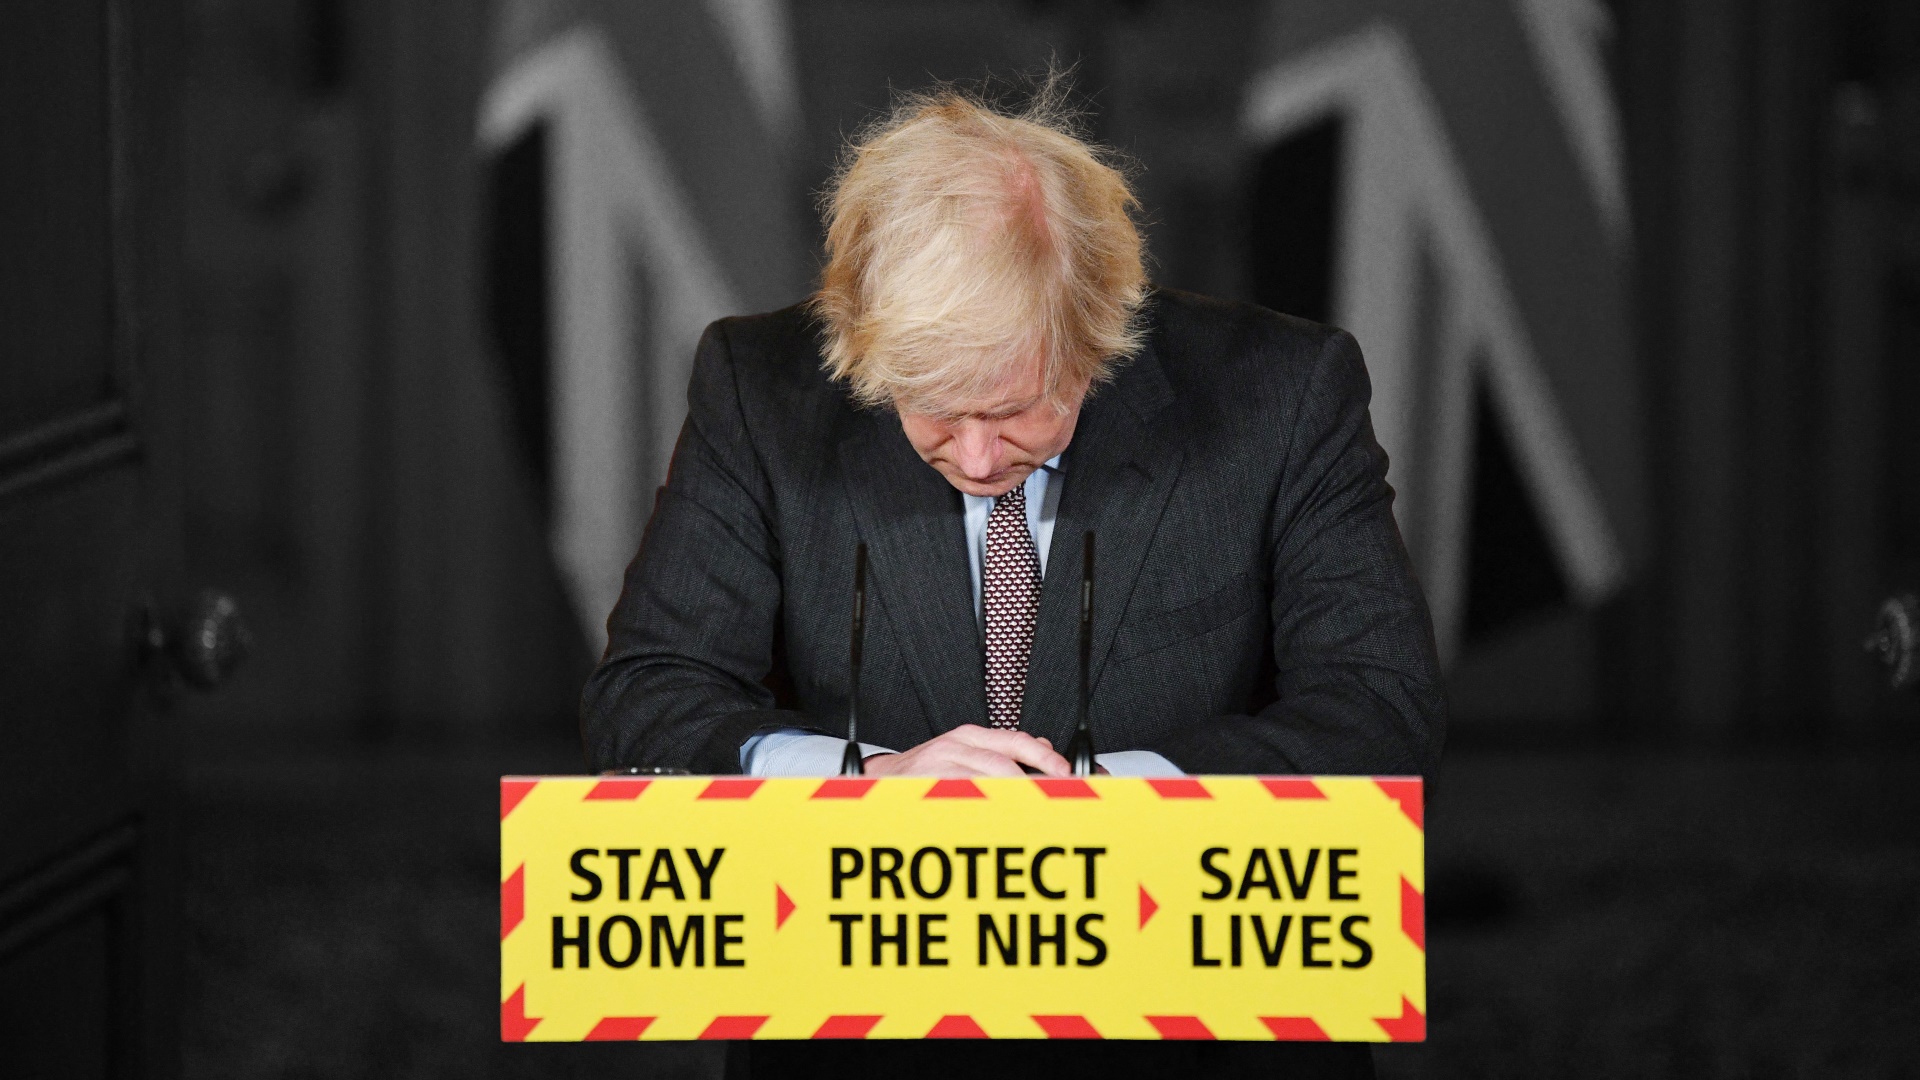 By the time Boris Johnson took this virtual press conference on January 26, 2021, more than 100,000 people in Britain had died after testing positive for coronavirus. Photo: Justin Tallis/AFP/Getty